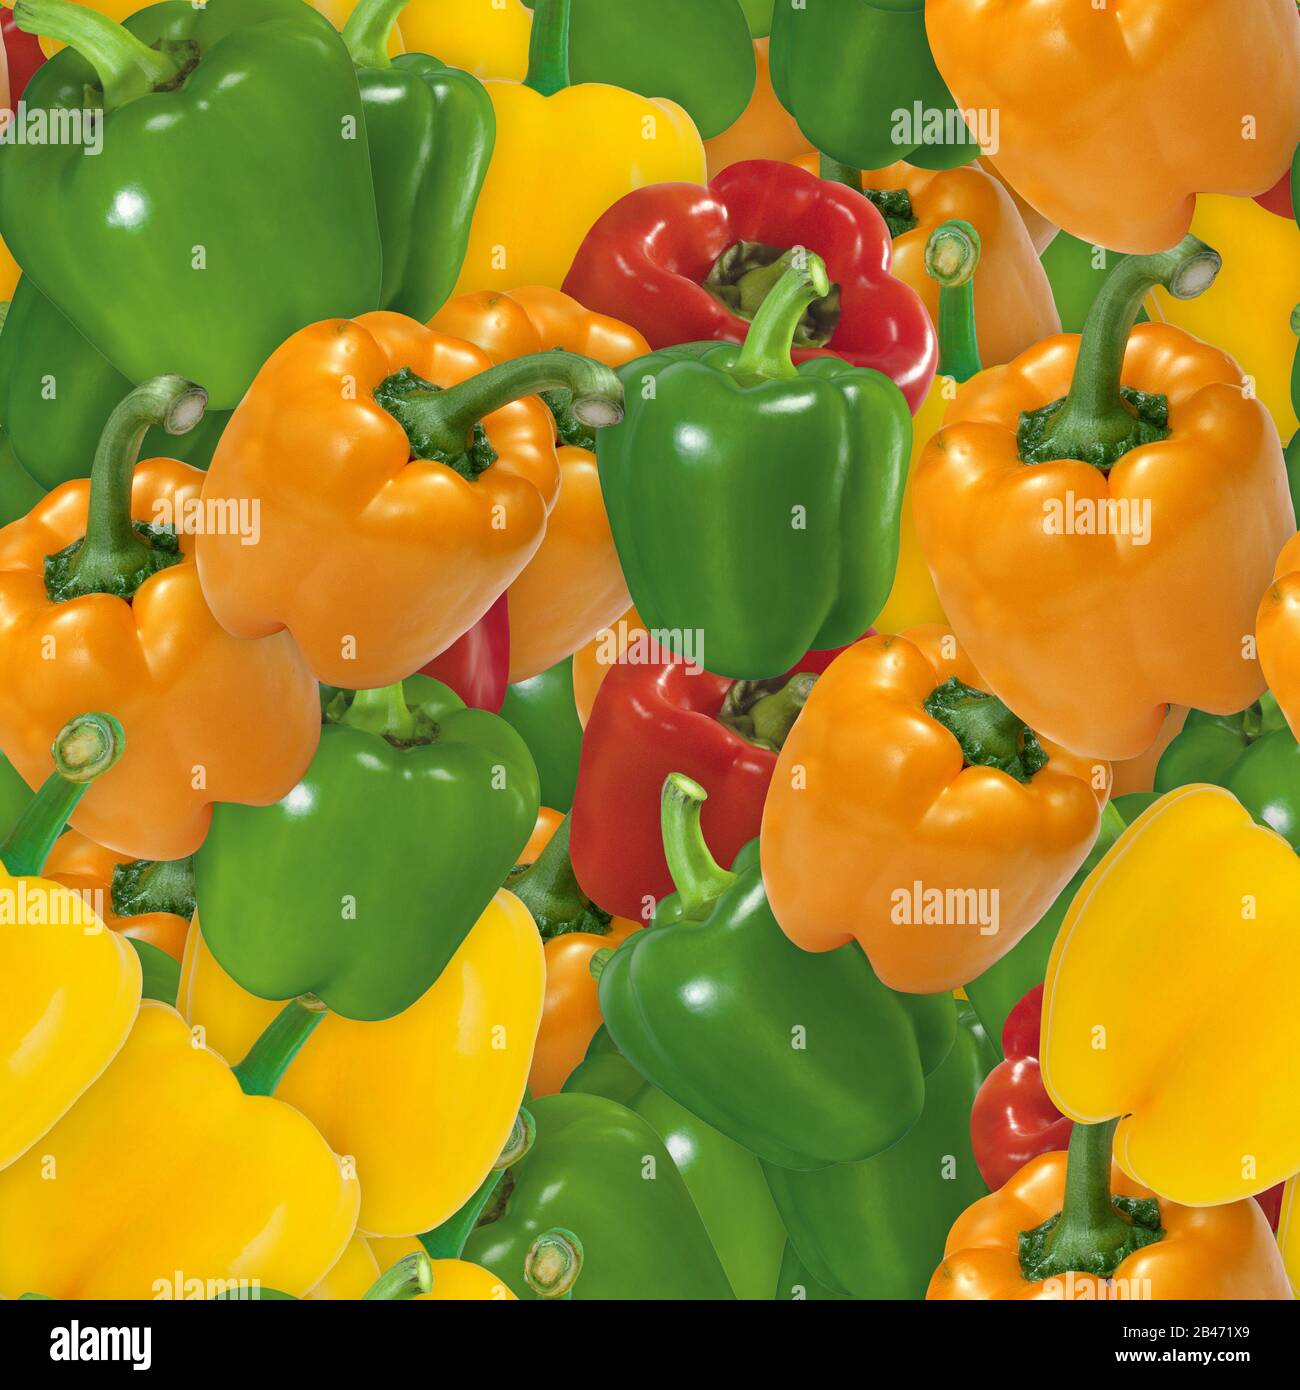 Bell Peppers Seamless Texture Tile Stock Photo